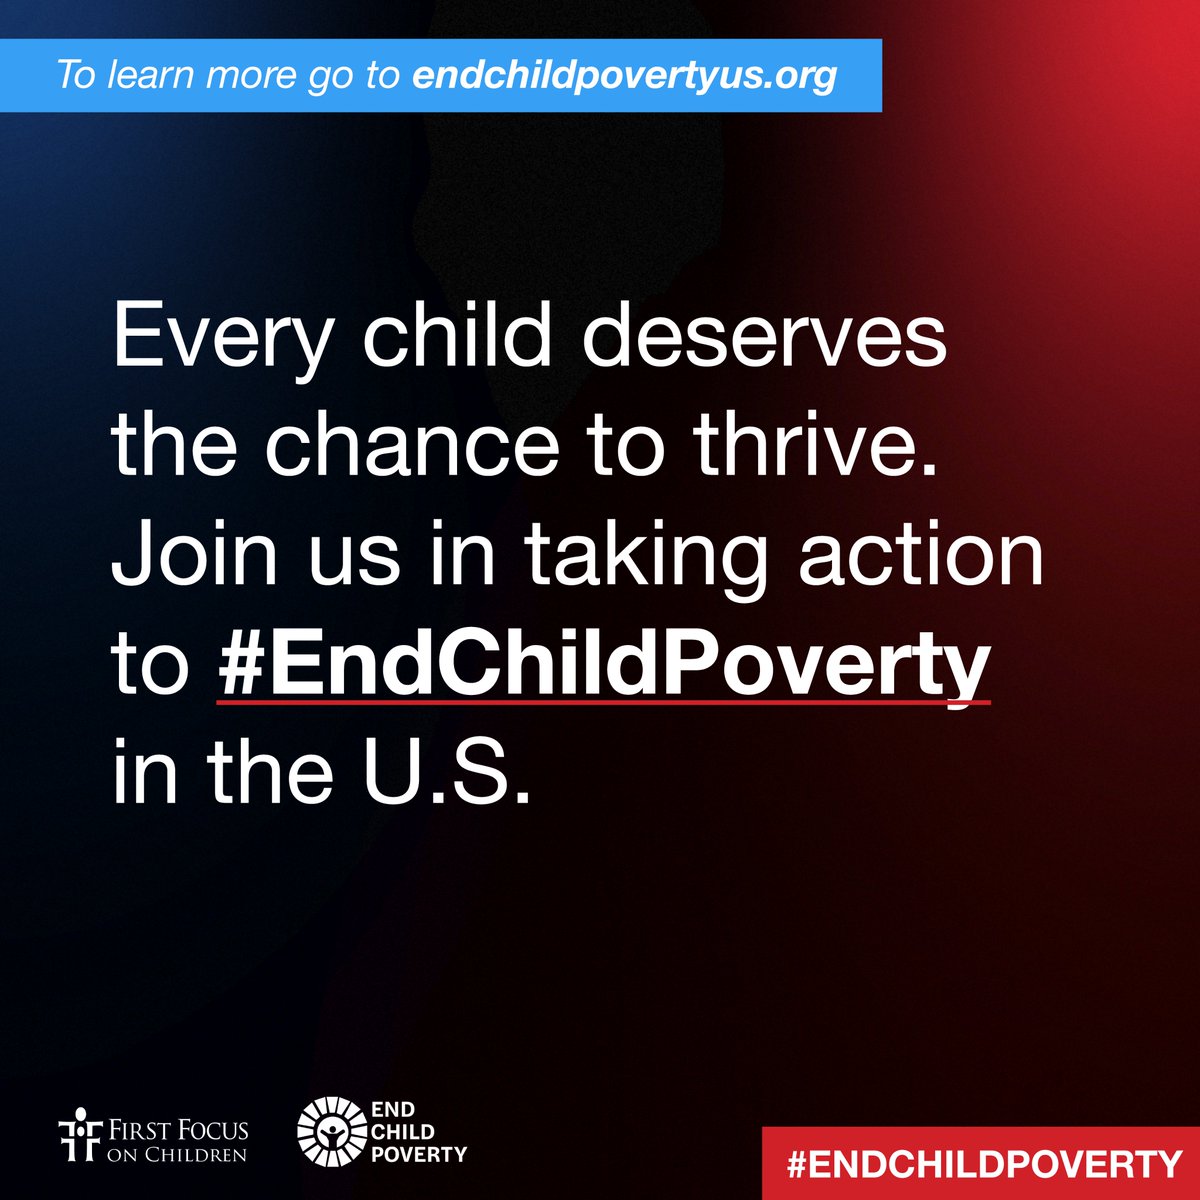 Puerto Rico & other US territories face higher rates of poverty & economic hardship than kids in the 50 states & DC due to unequal access to benefits as part of a history of racism & discrimination of Americans in the territories. #EndChildPoverty